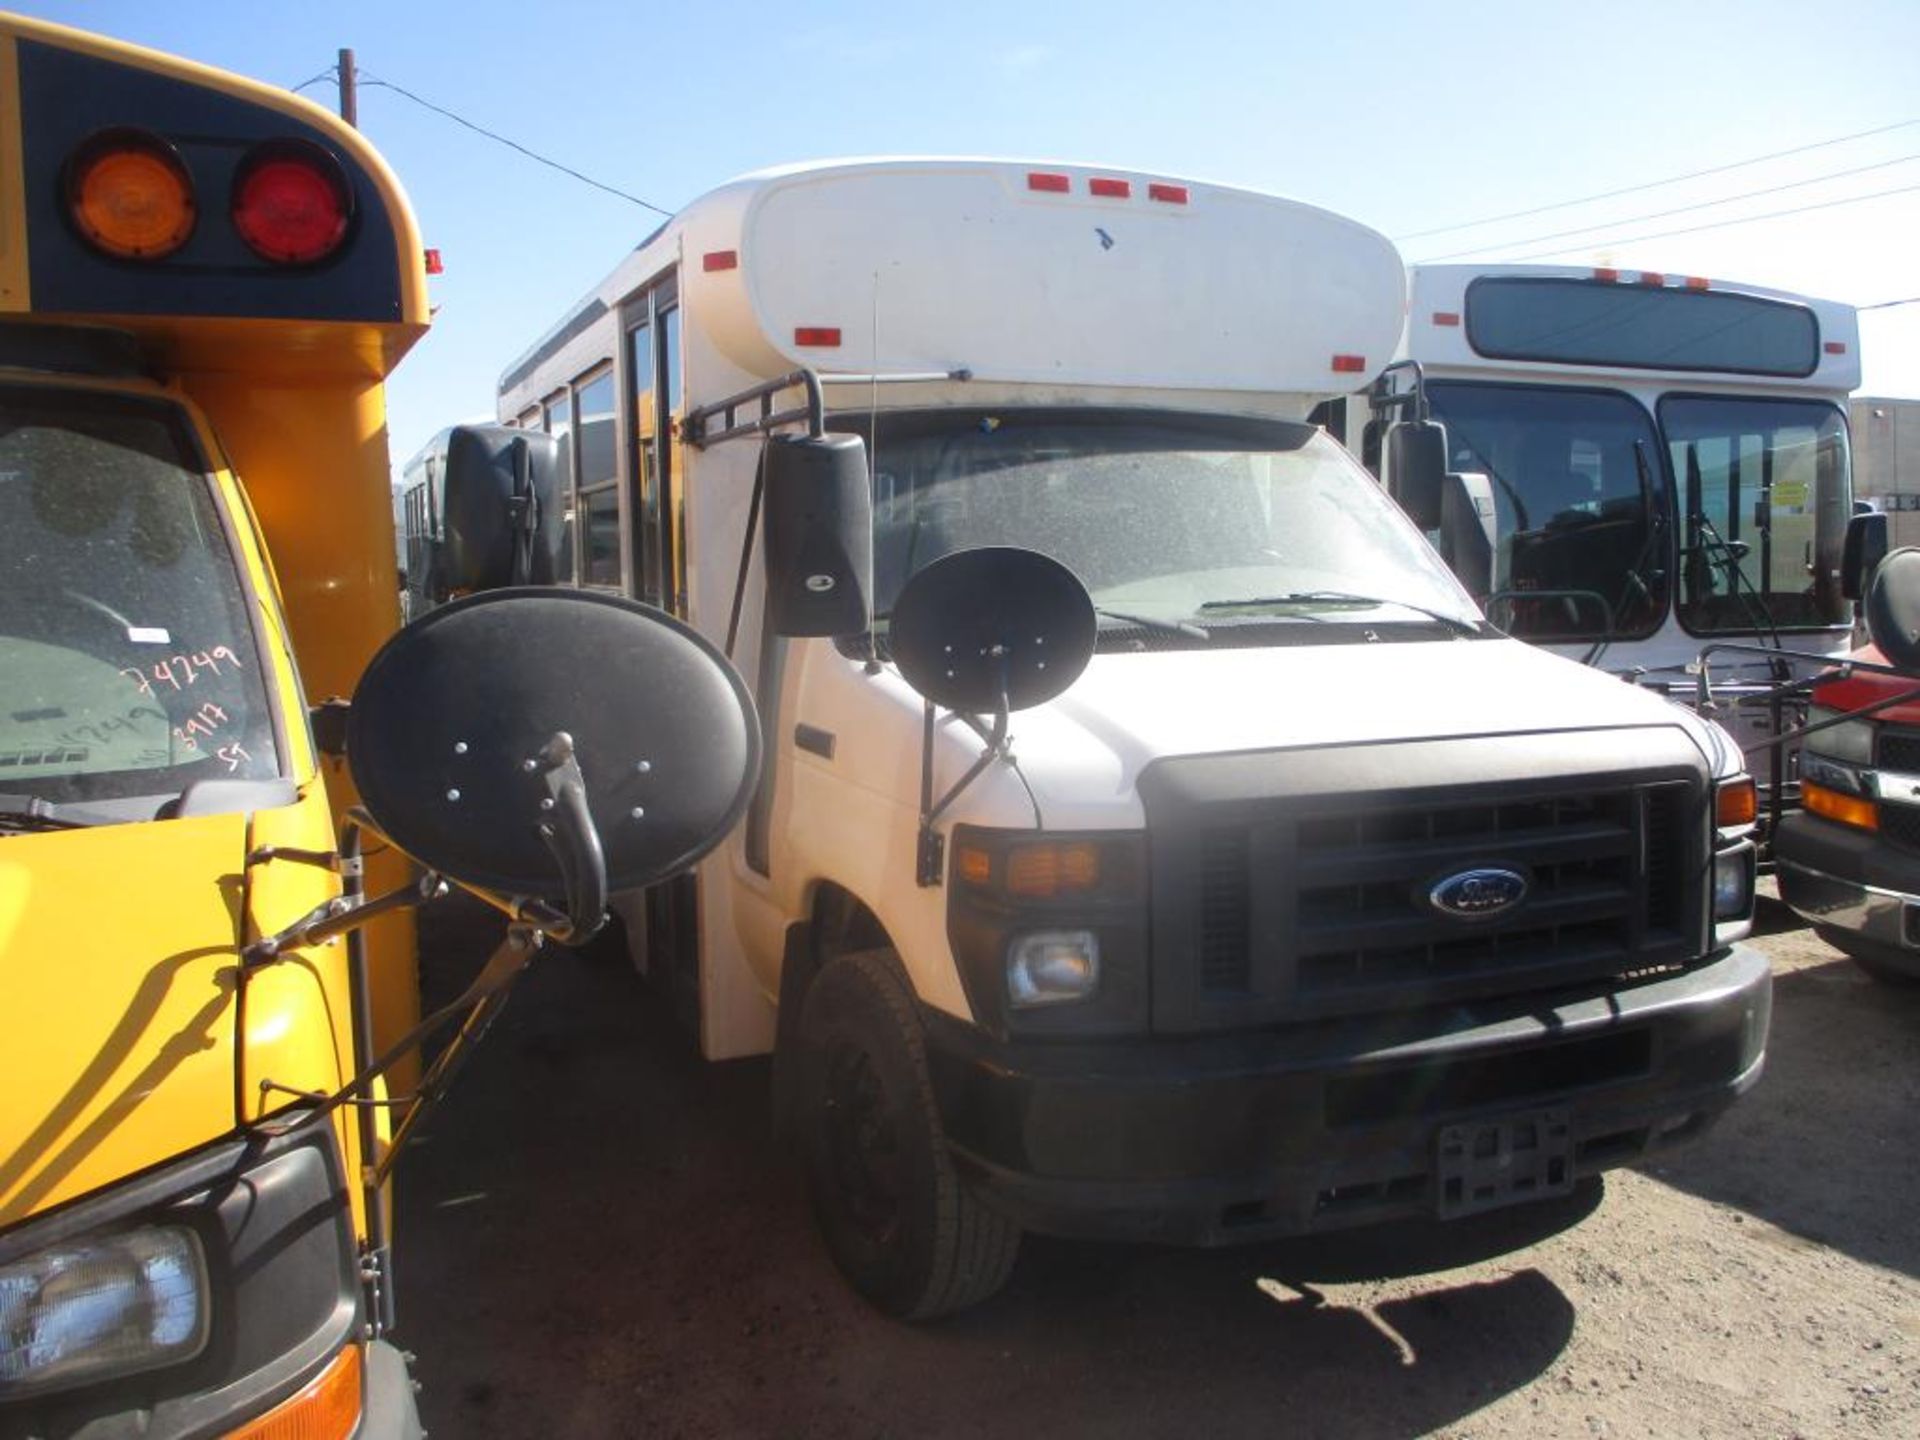 (Lot # 3922) - 2008 Ford E-Series School Bus - Image 4 of 11